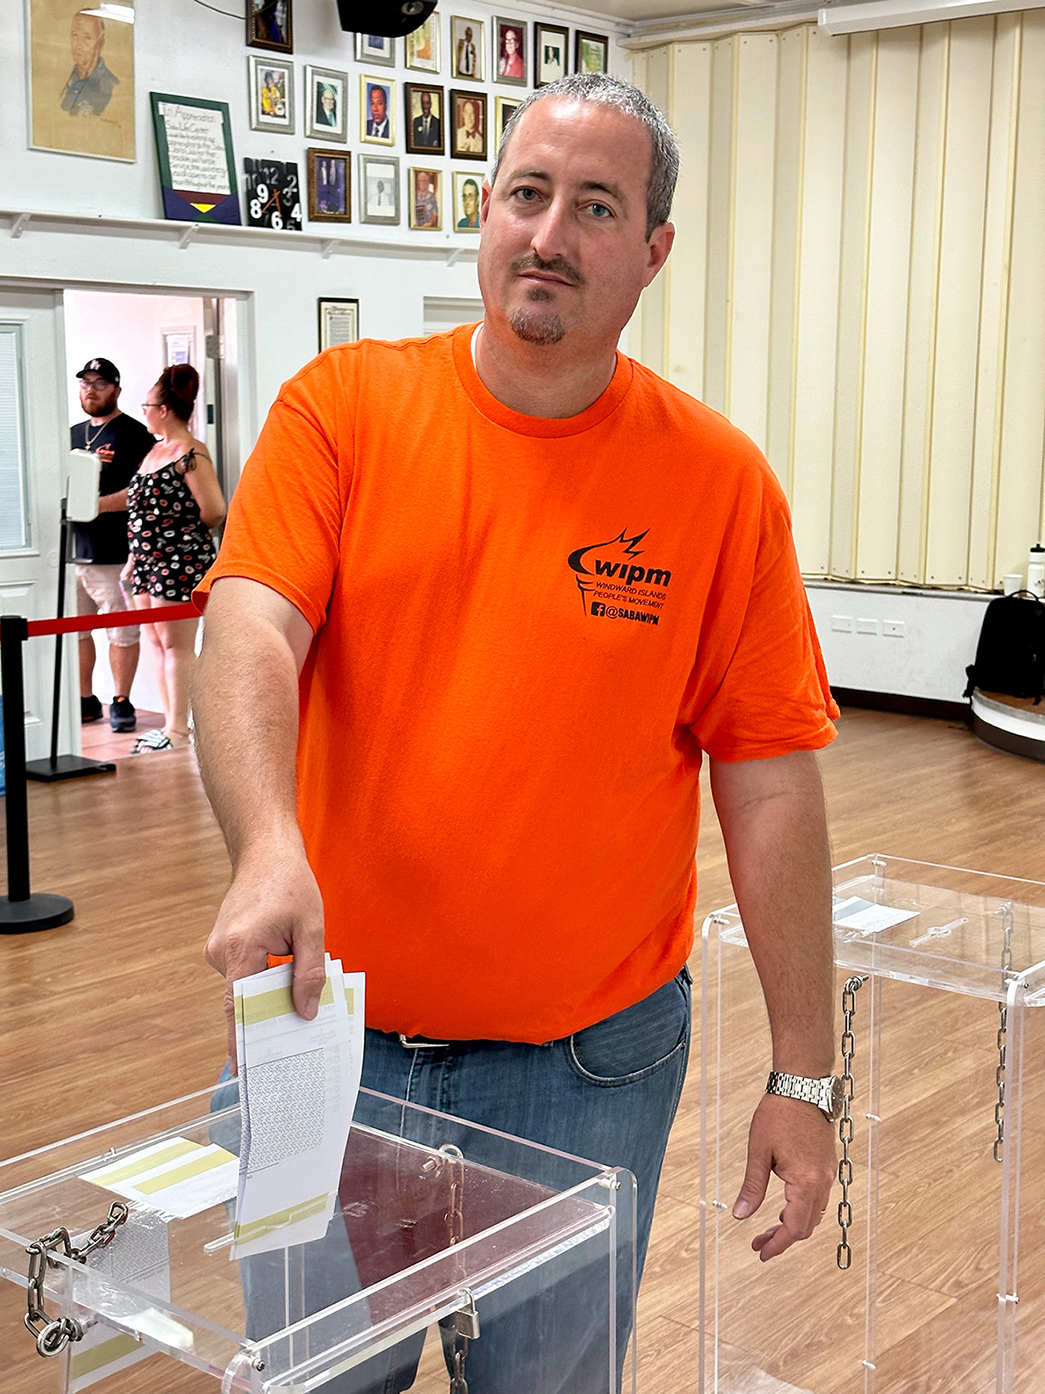 Bruce Zagers Of Wipm Casts Vote At Polling Station Windwardside